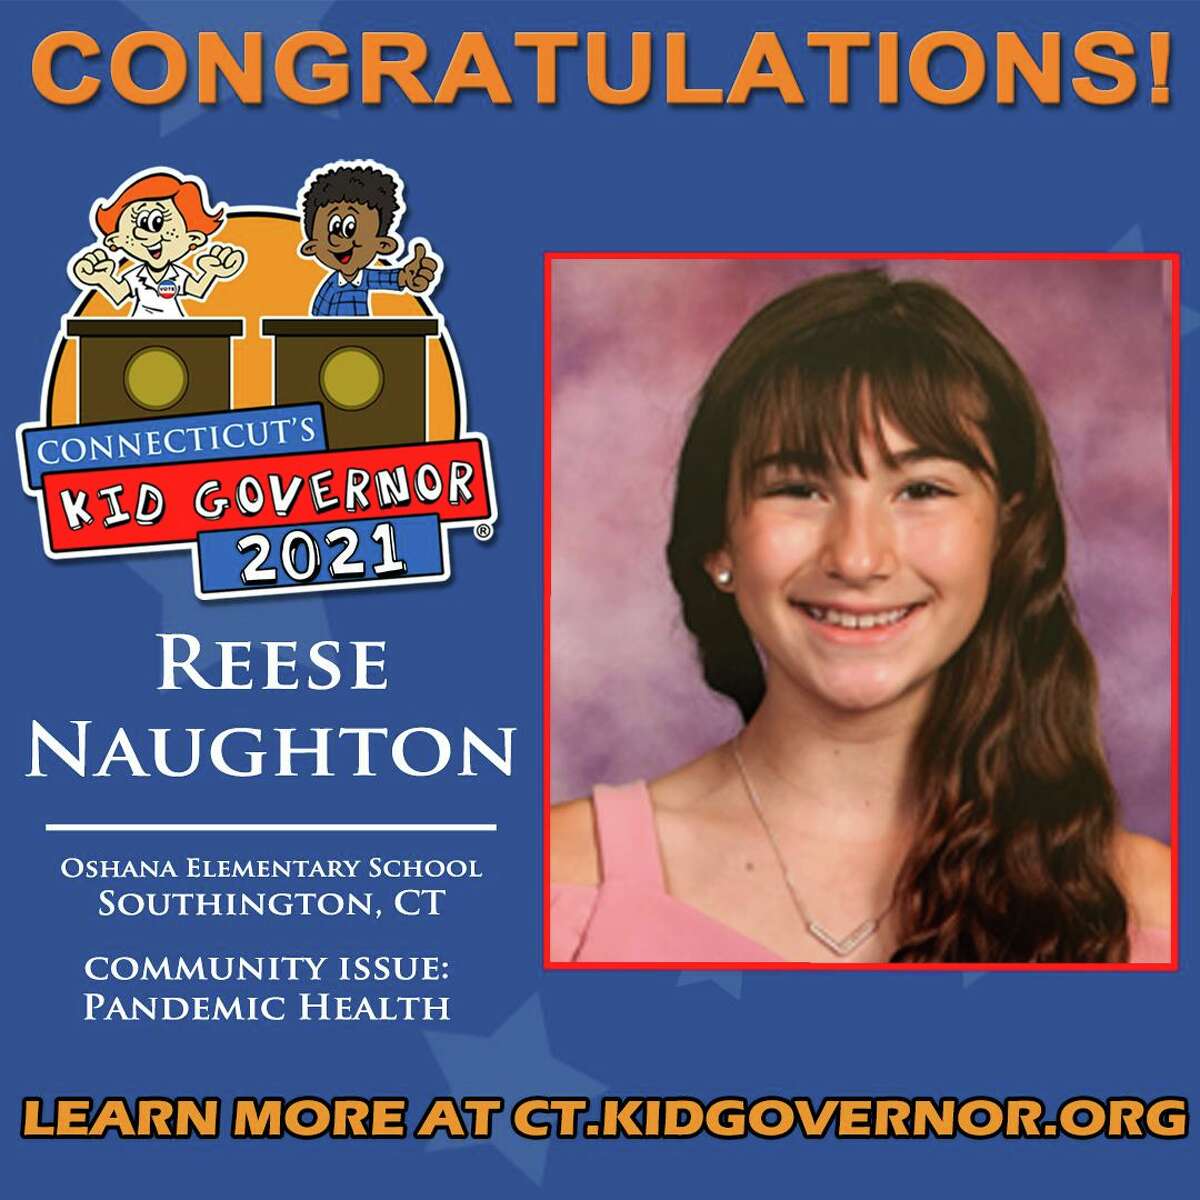 Reese Naughton The Connecticut Democracy Center recently announced the winner of the Connecticut’s Kid Governor® (CTKG) Statewide Election: Reese Naughton of Oshana Elementary School in Southington. The announcement came during an outdoor, socially distanced assembly where Reese and her peers were surprised with the news.